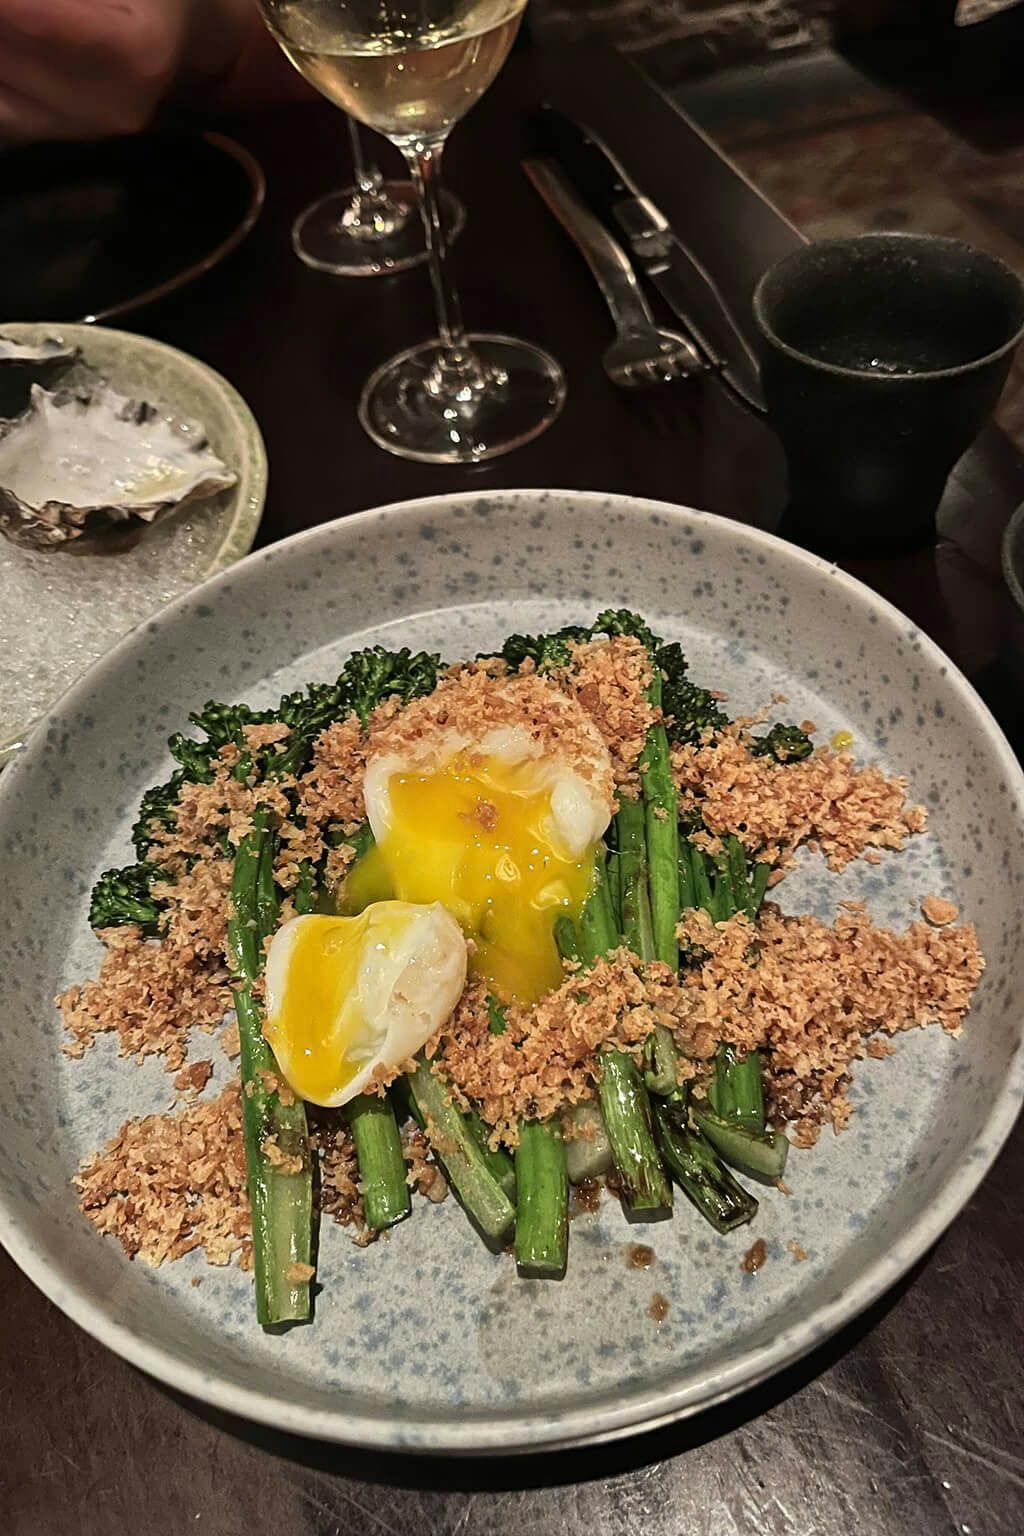 Grilled broccolini with charred soy sauce, poached egg, panko and tarragon. | Photo by Taylor Markarian.